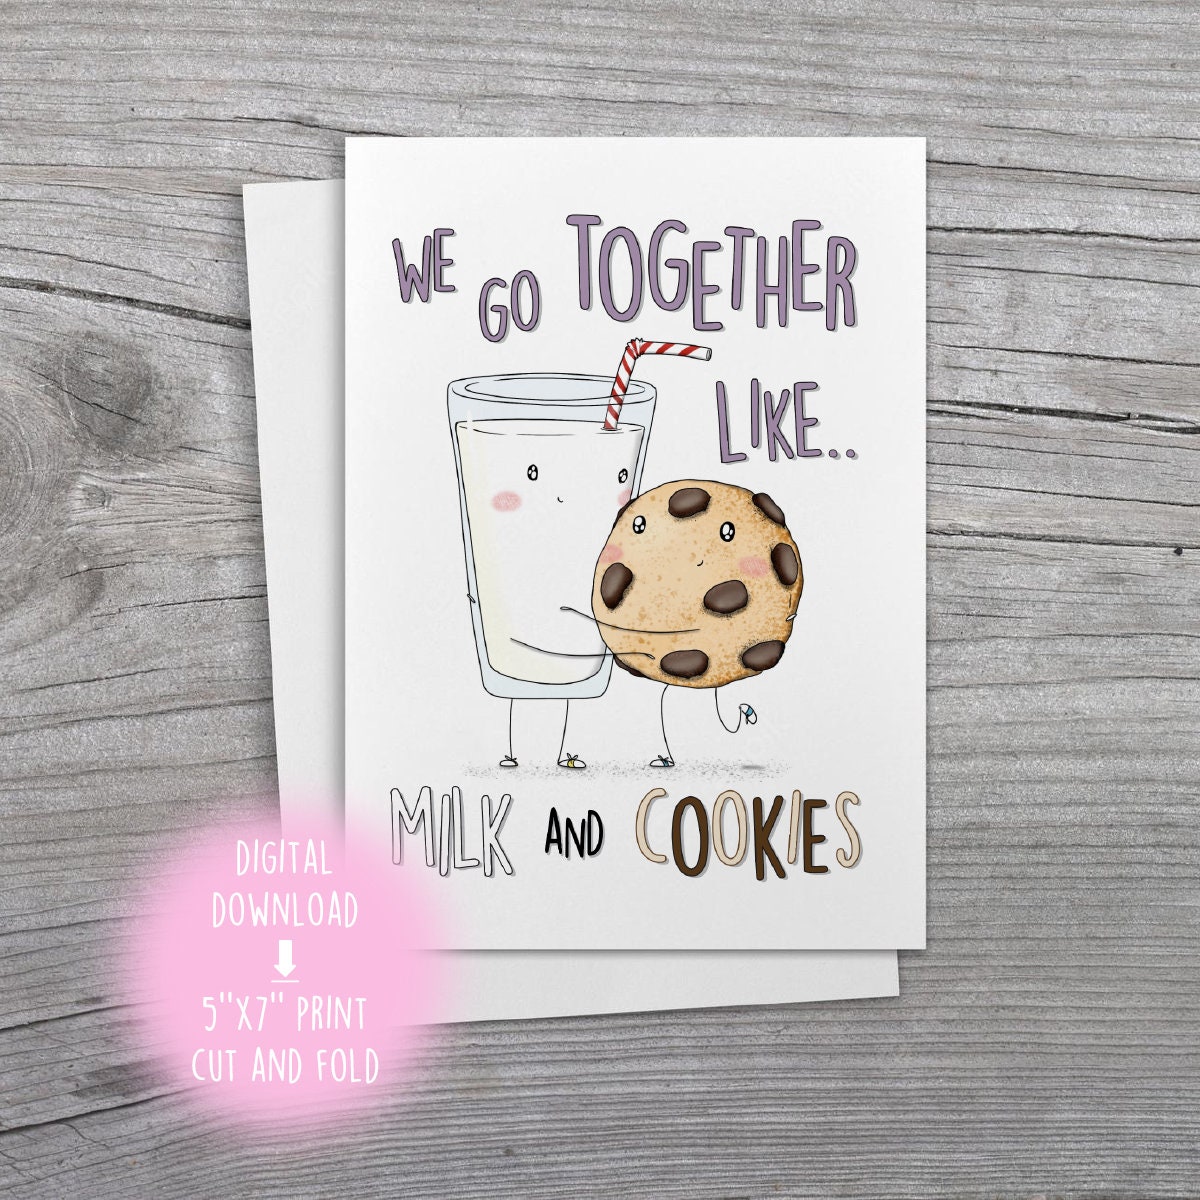 Cookies and Milk Pun - Etsy